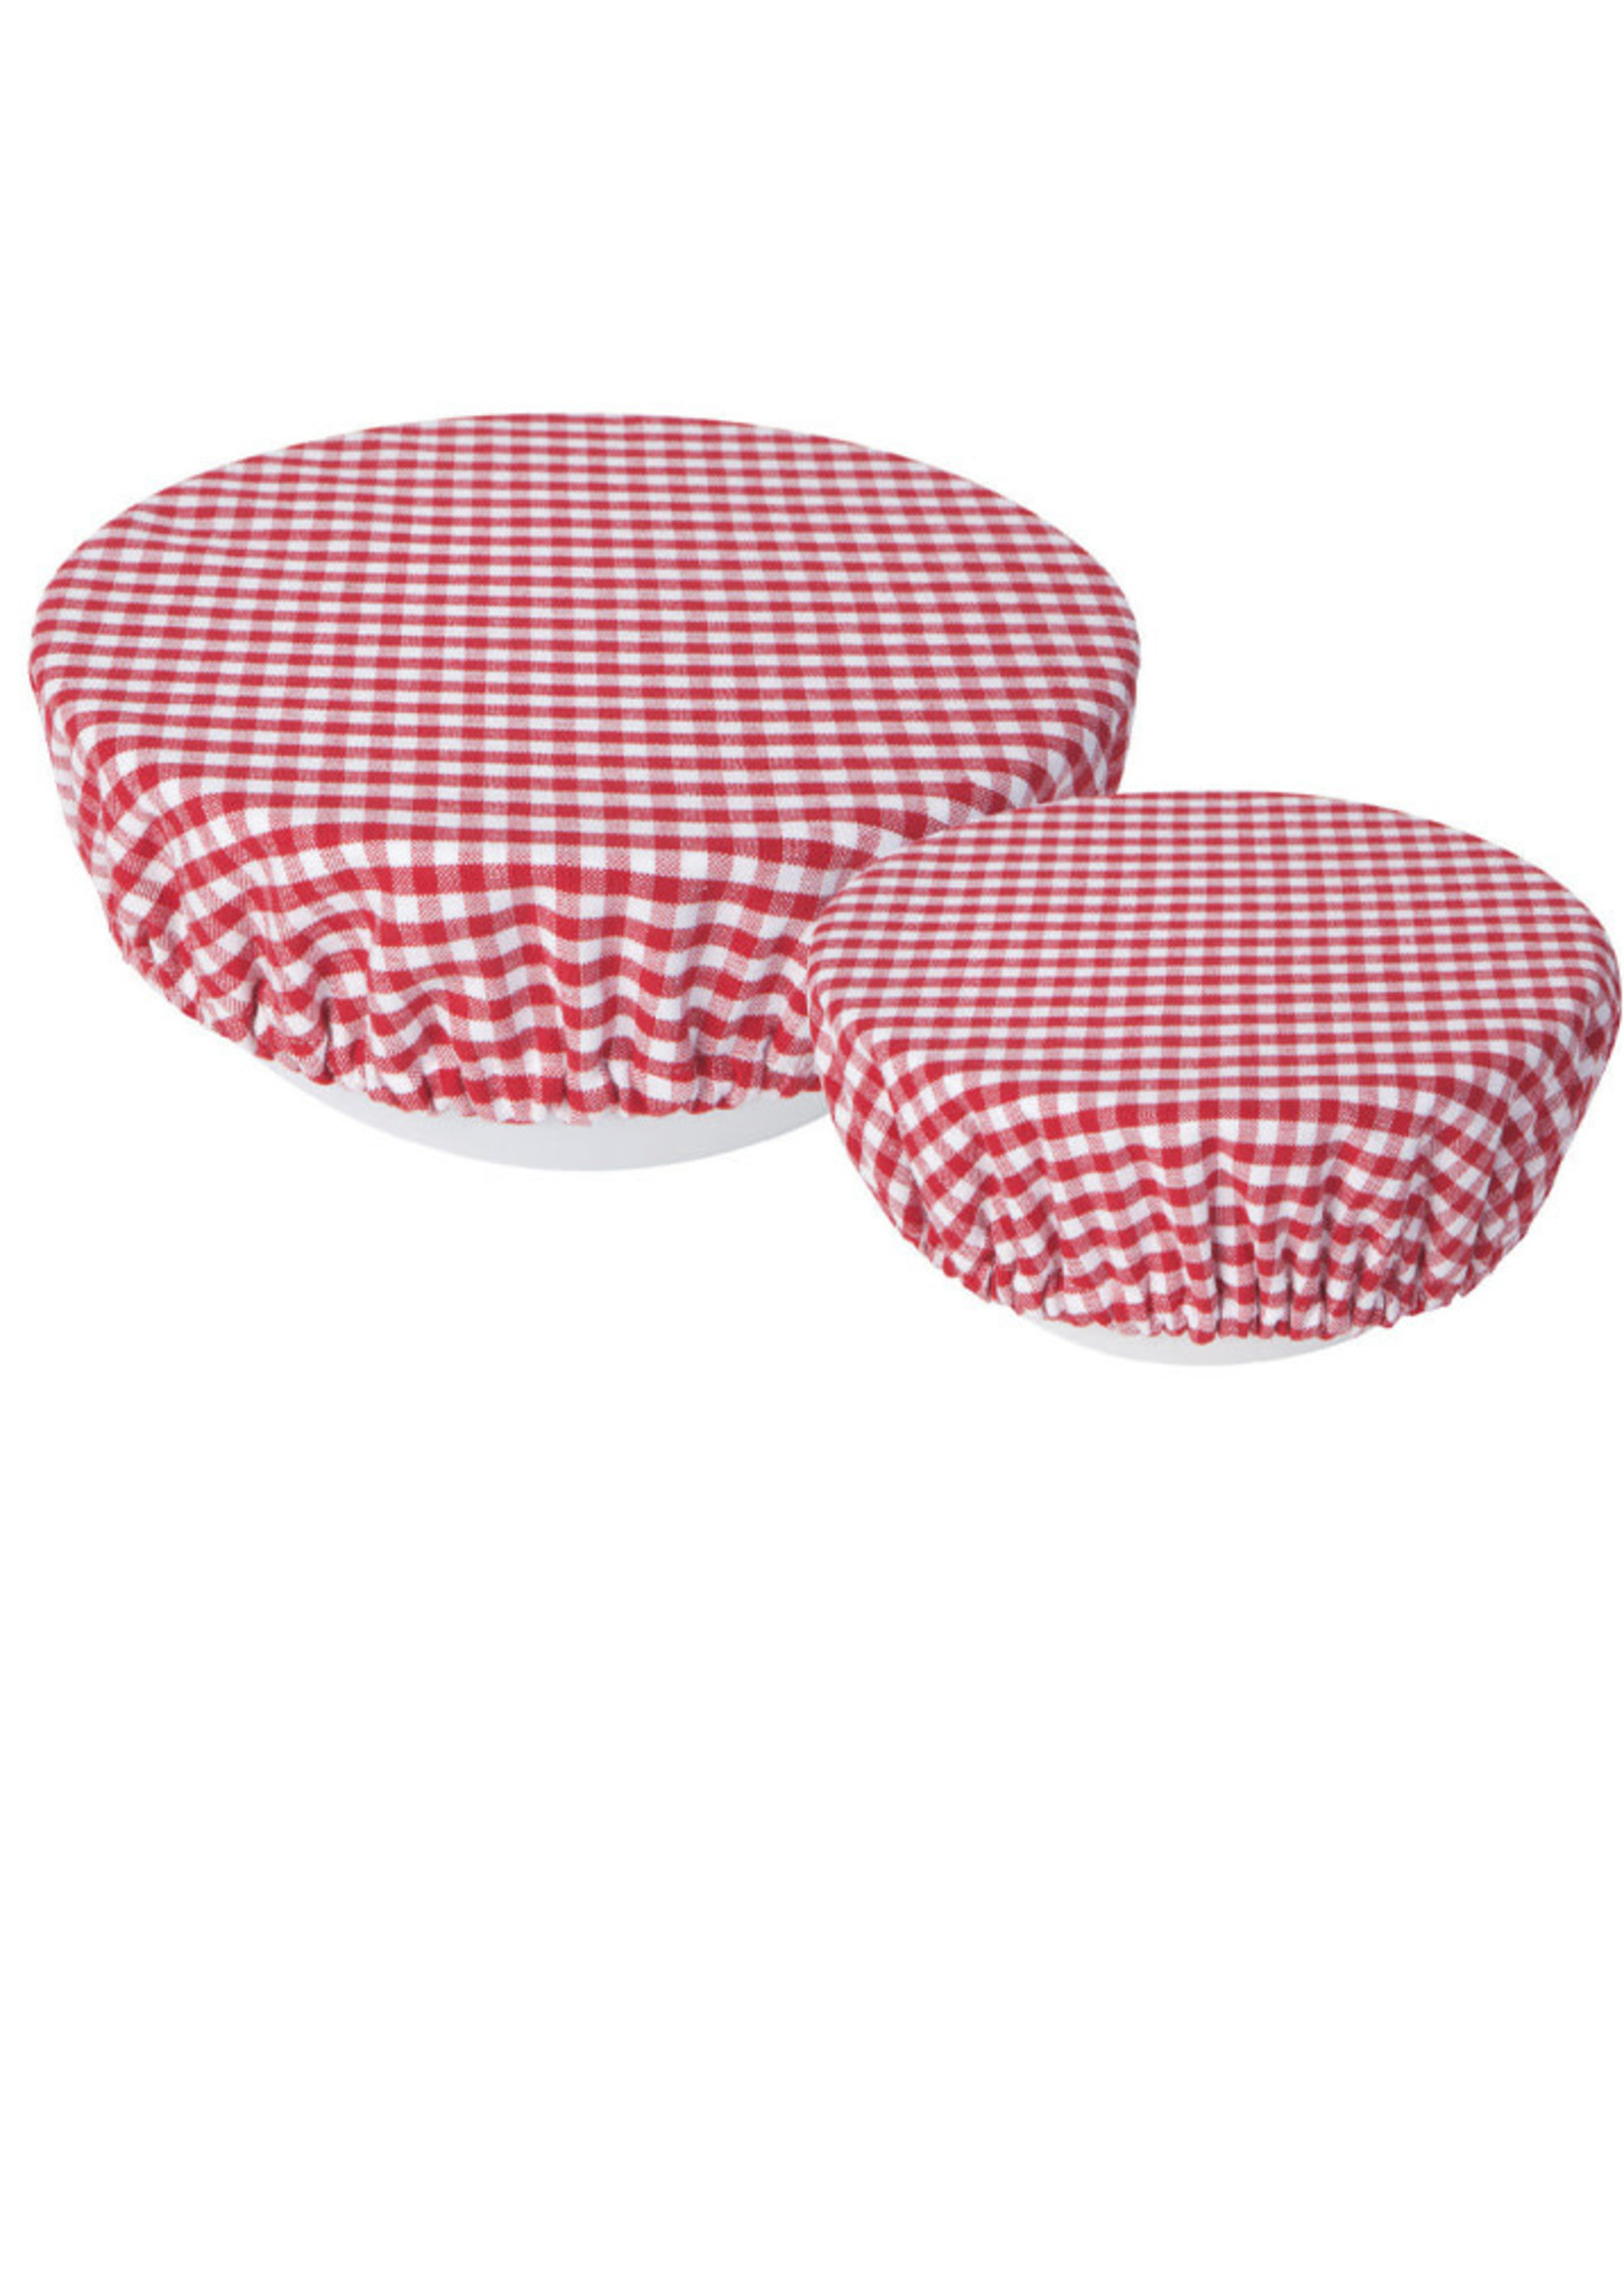 Gingham Bowl Cover Set of 2